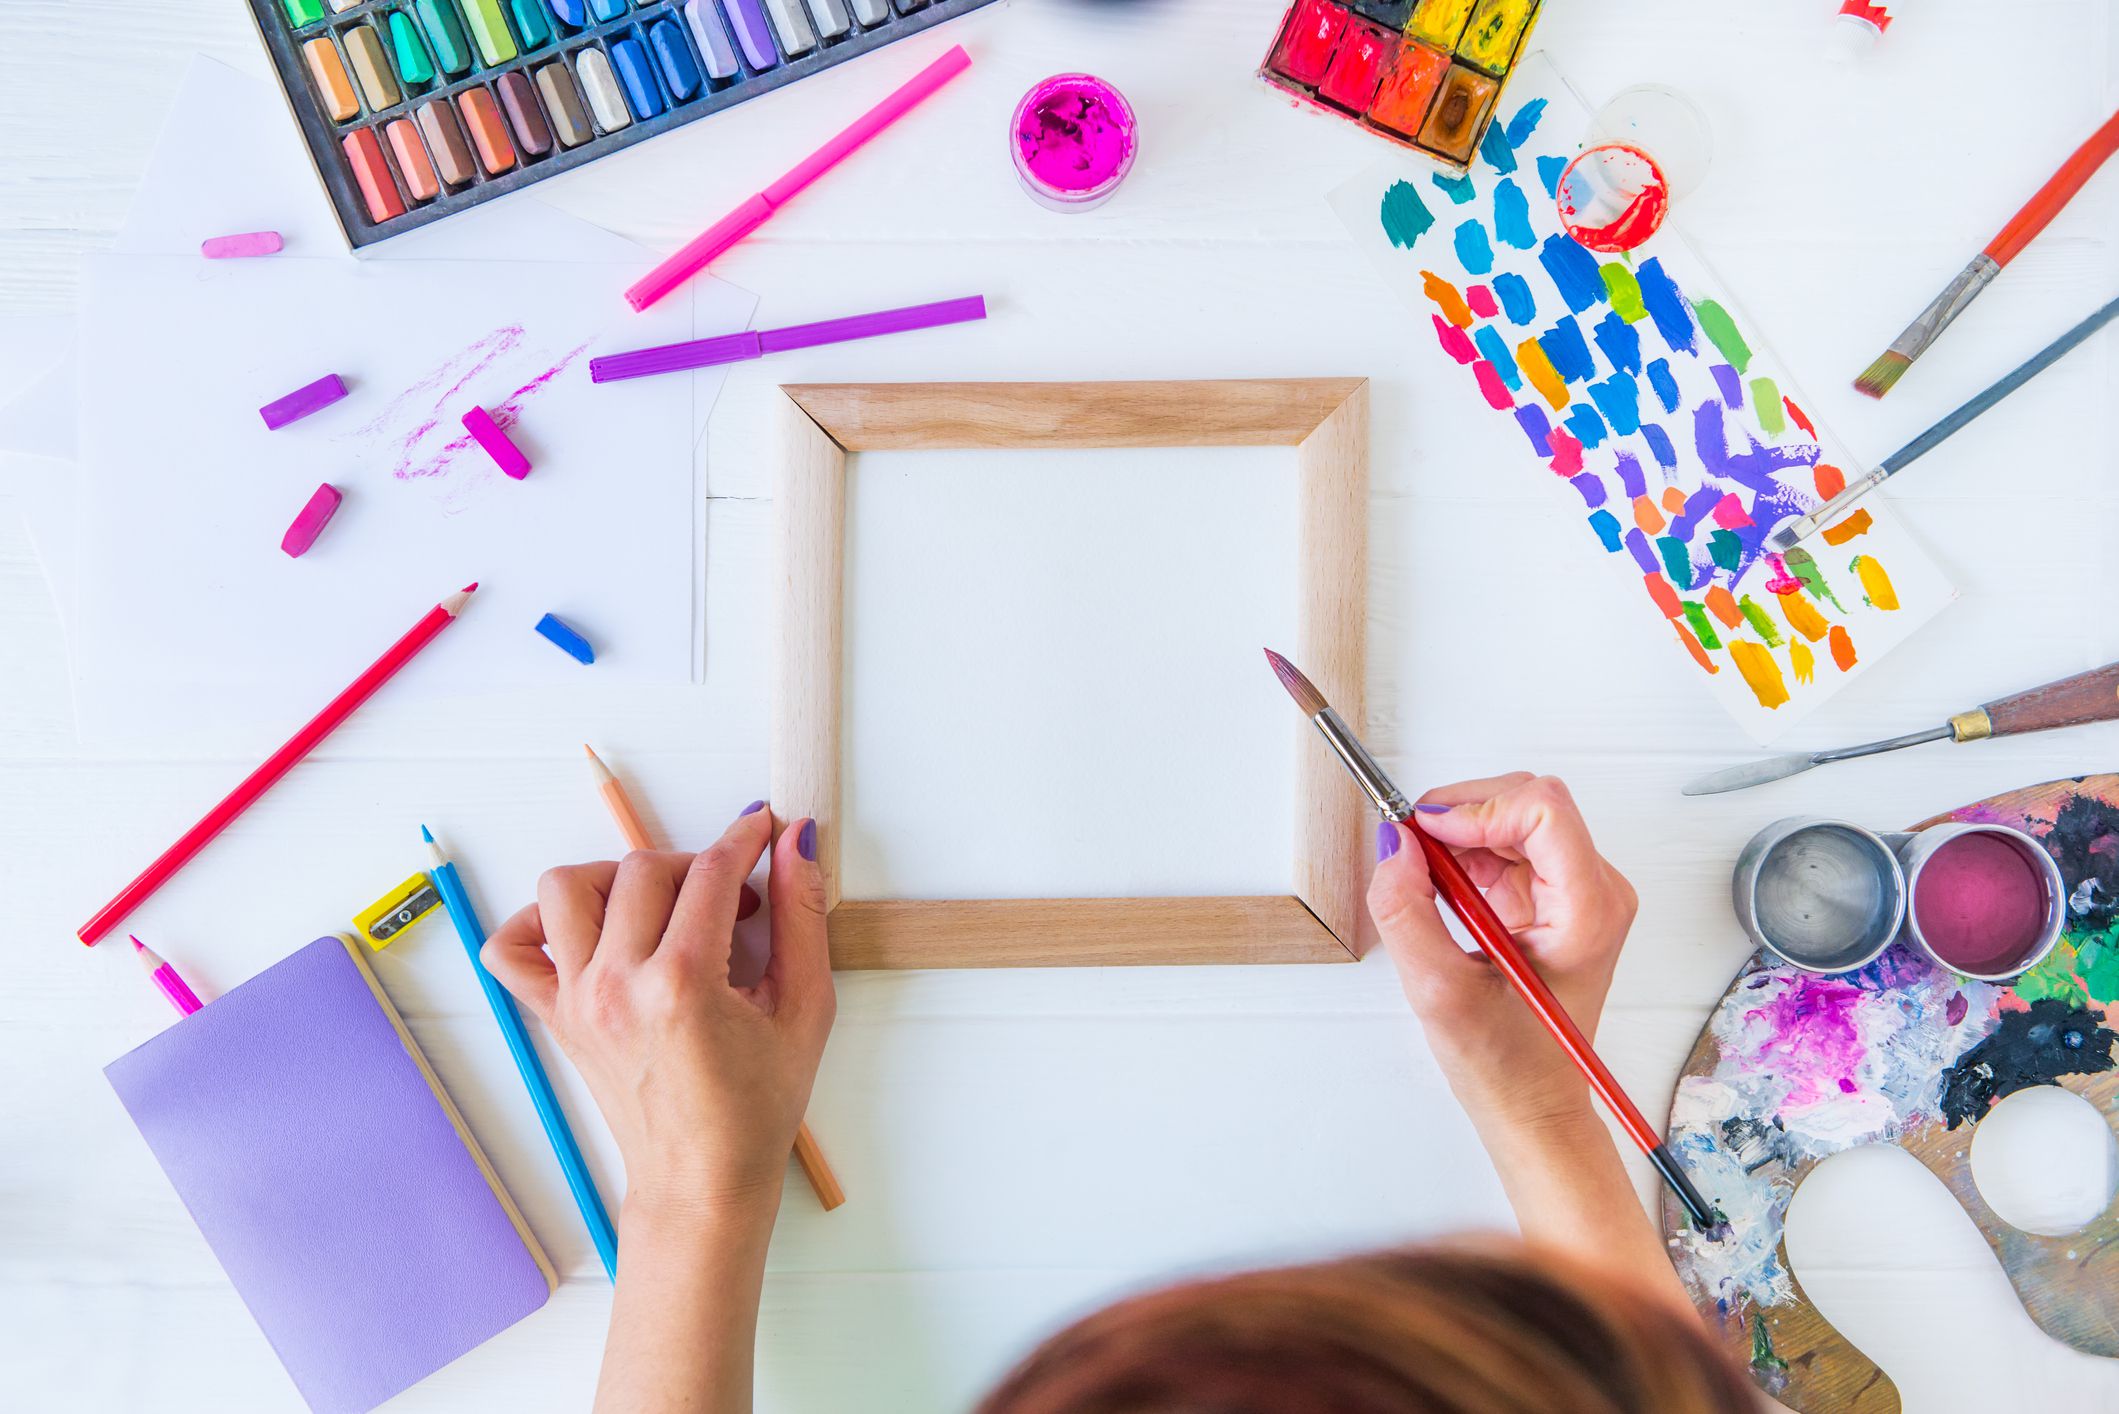 Company insurance is intended to safeguard the financial assets of a business owner and is a necessary investment for an art classes business.